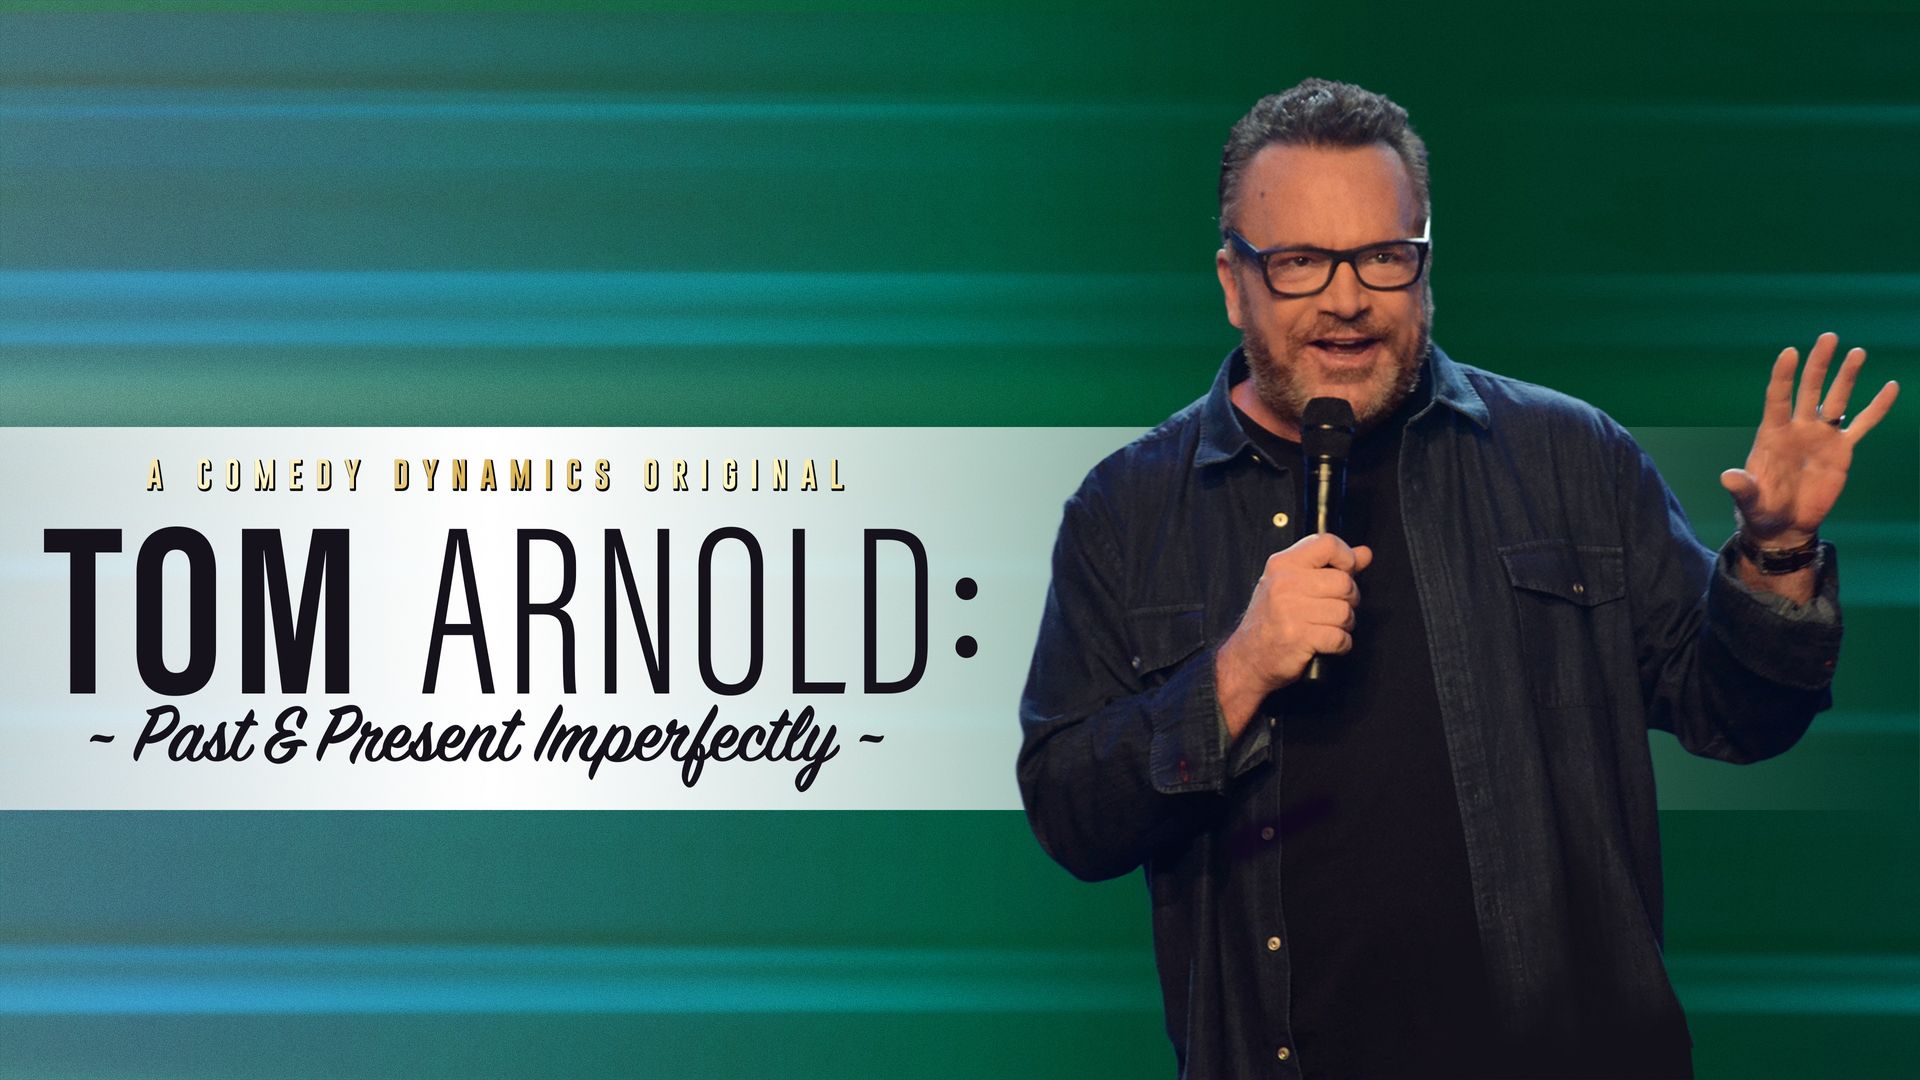 Tom Arnold: Past & Present Imperfectly Backdrop